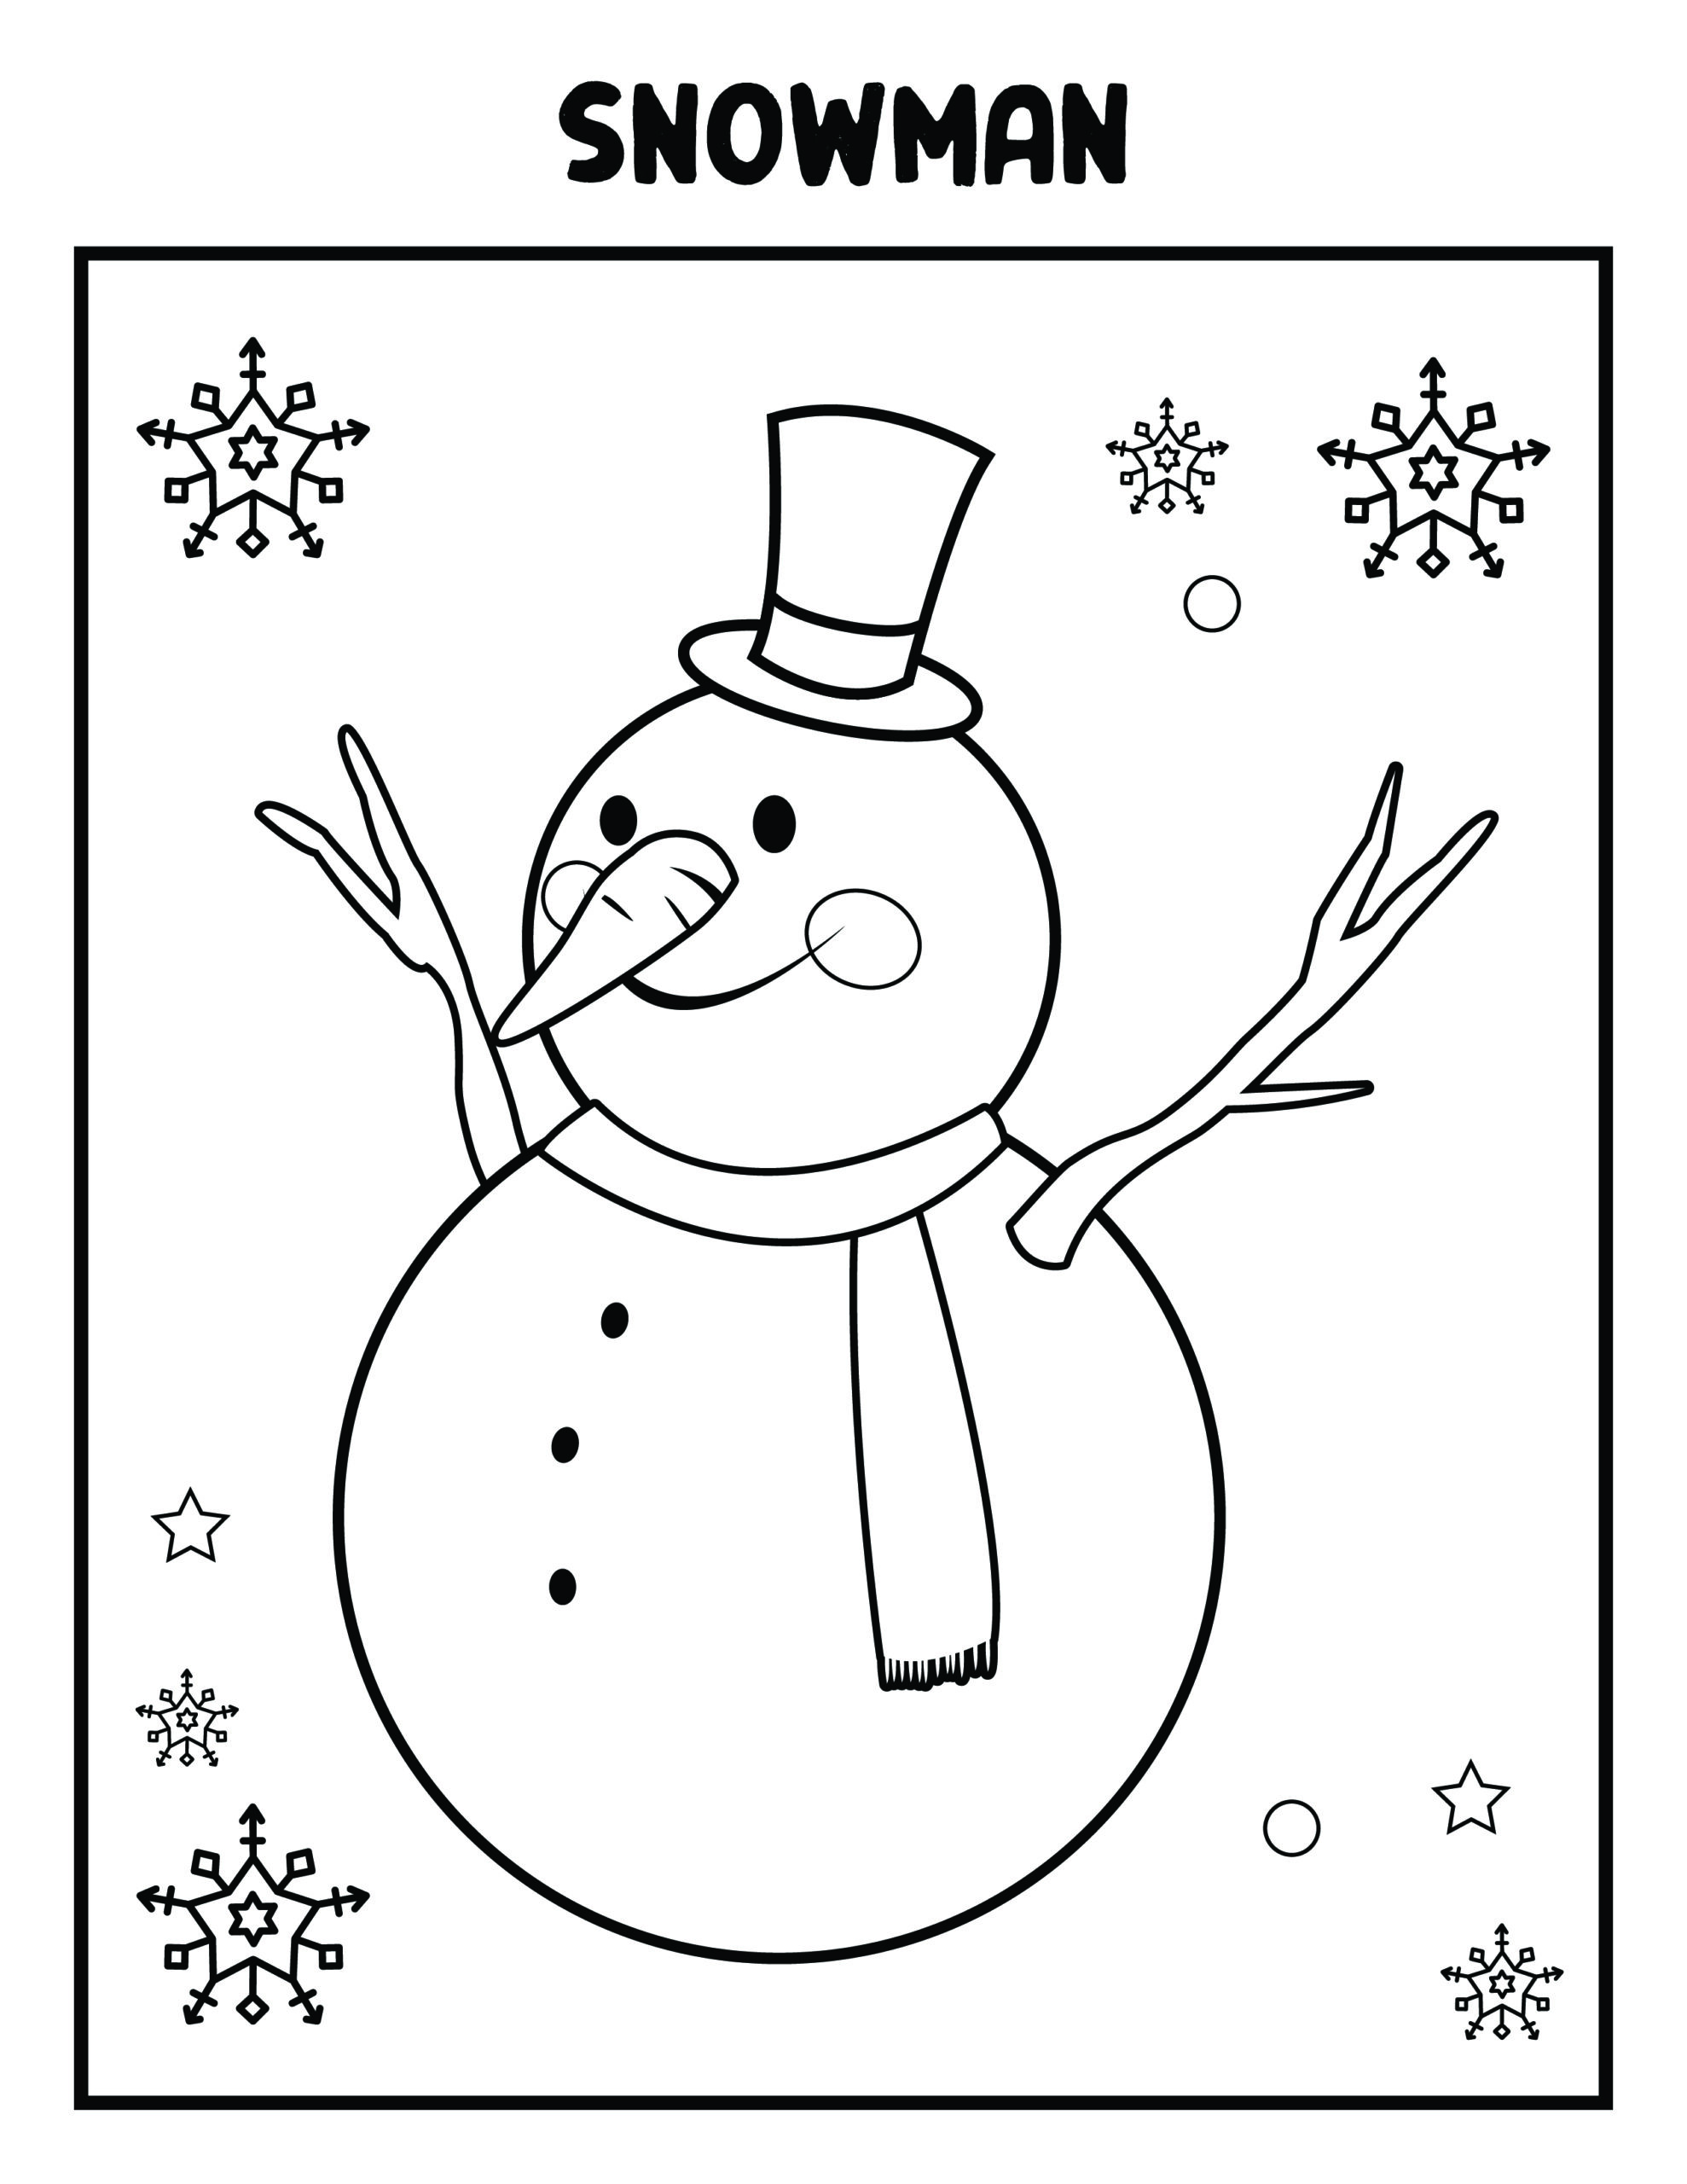 January Coloring Pages for Kids 6 FREE ONES Mom Generations